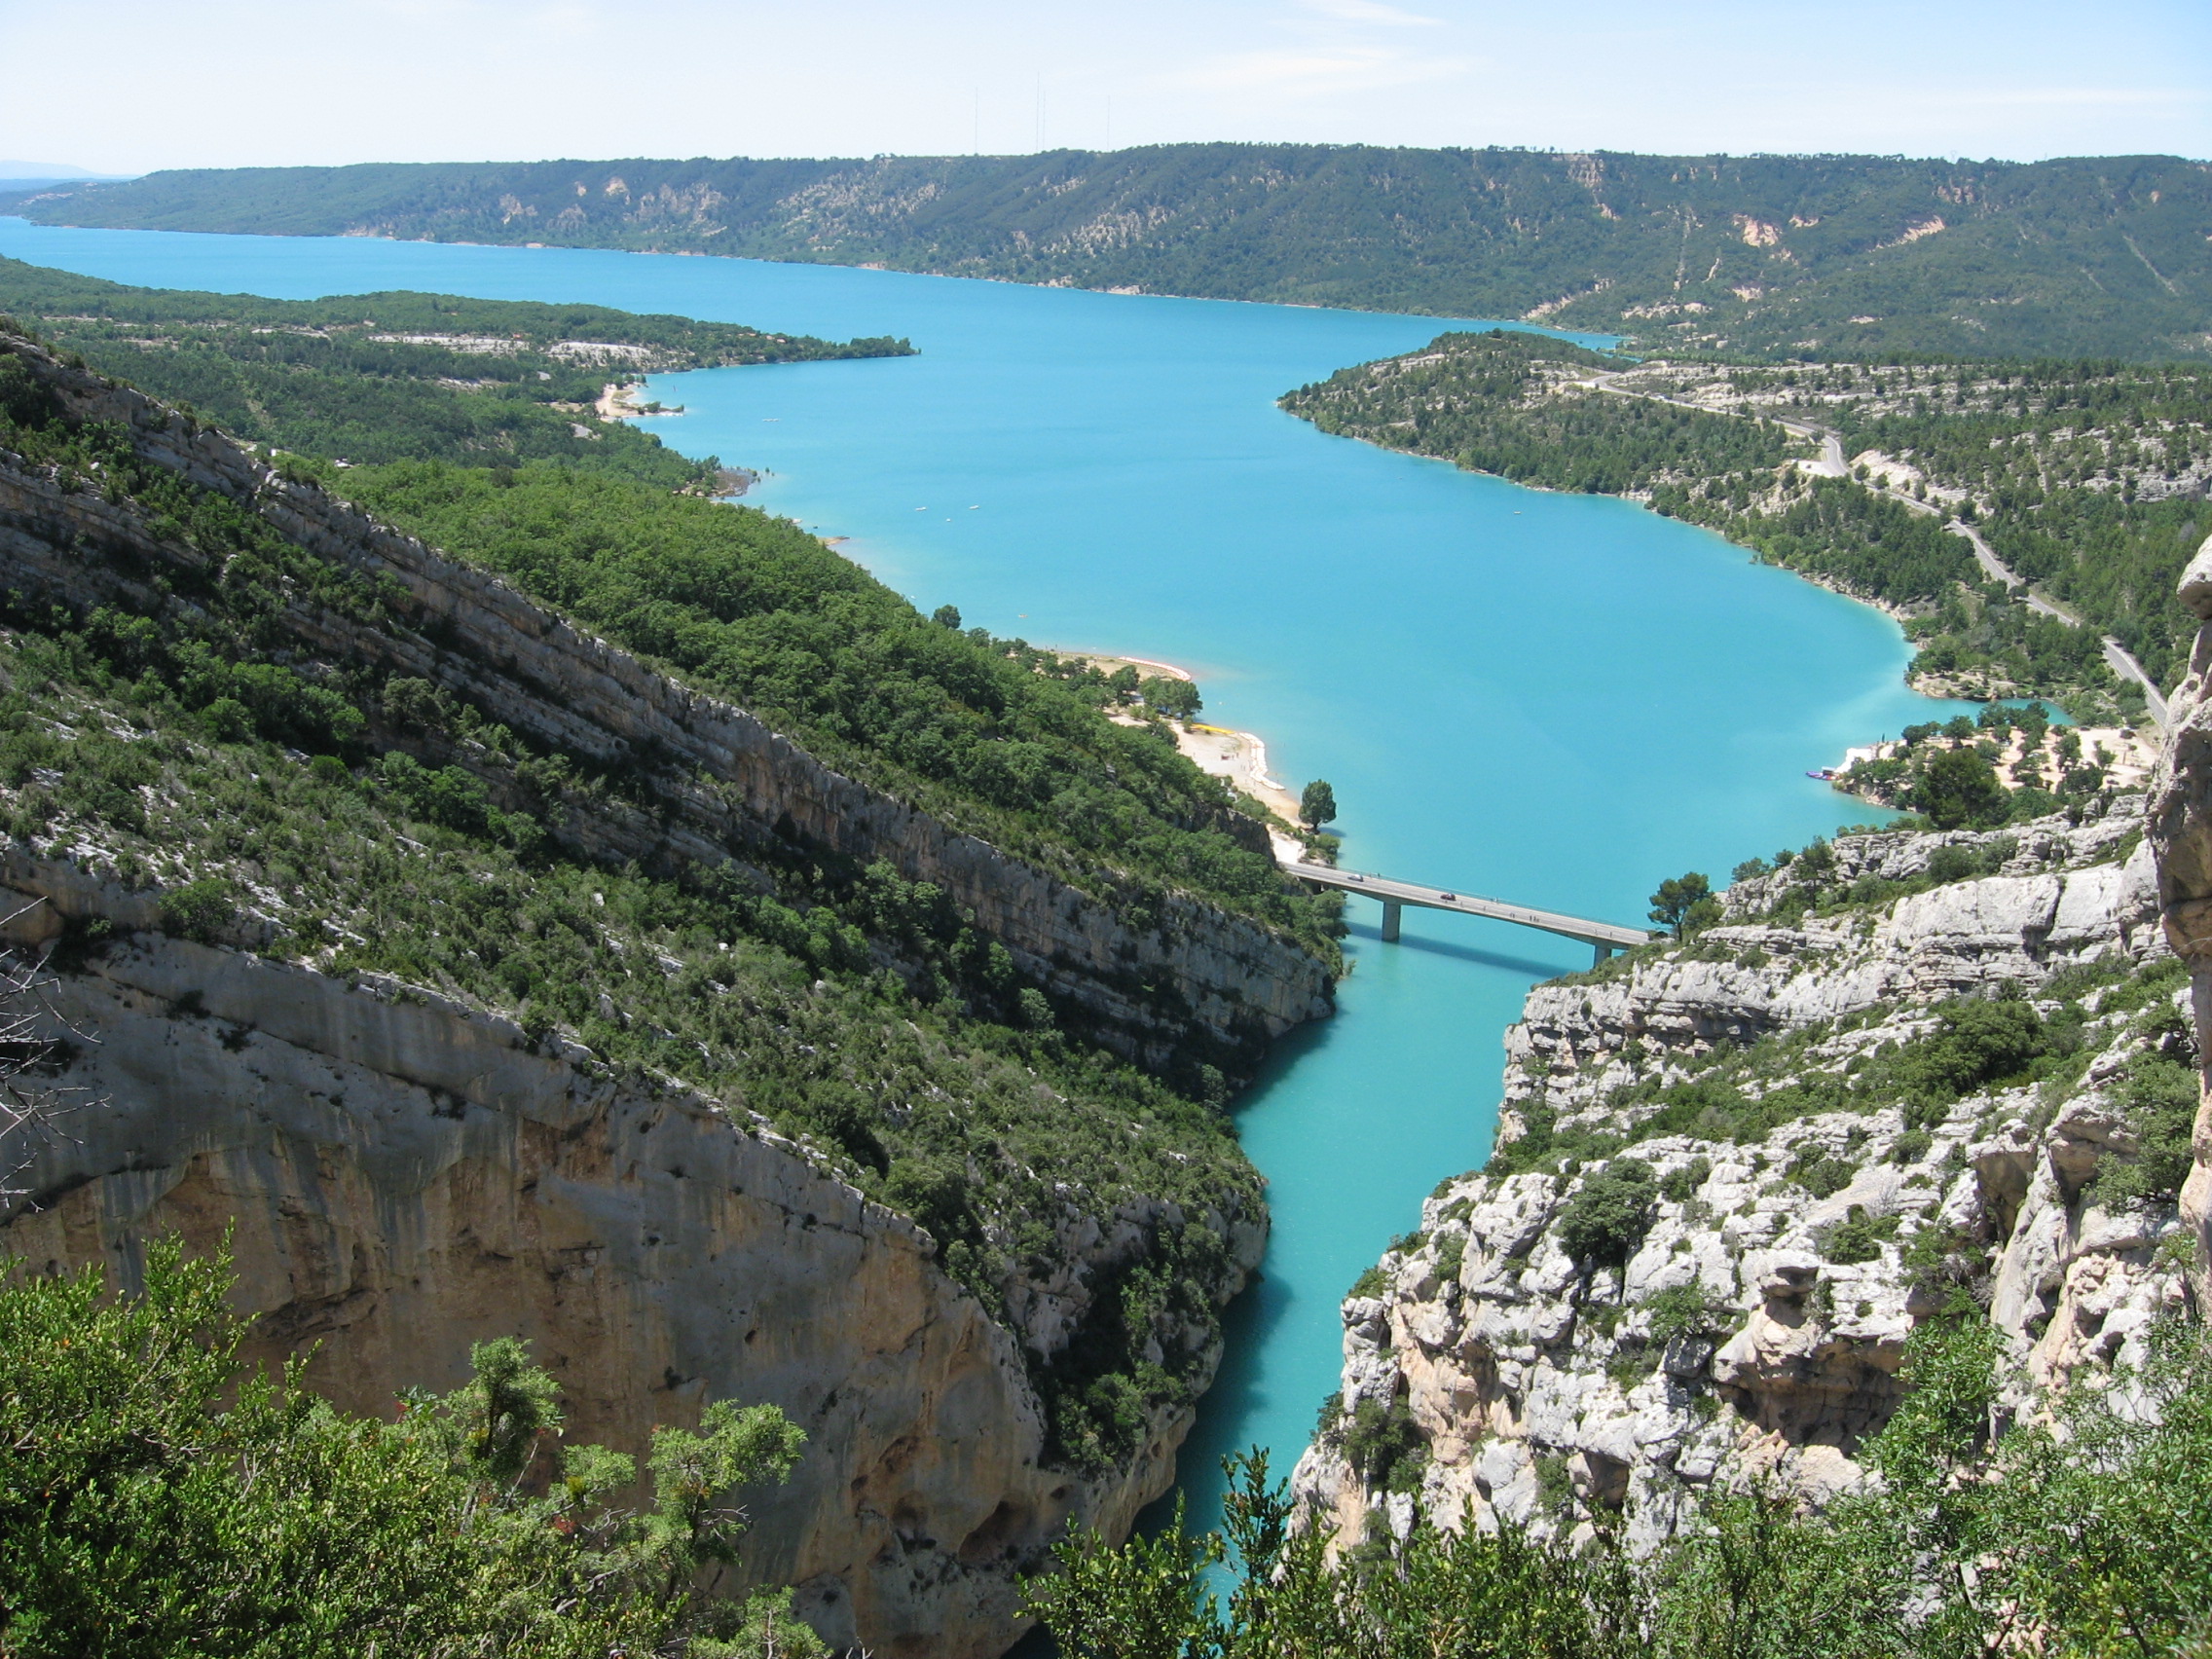 The Sainte-Croix lake and the Galetas and the Chabassole beaches